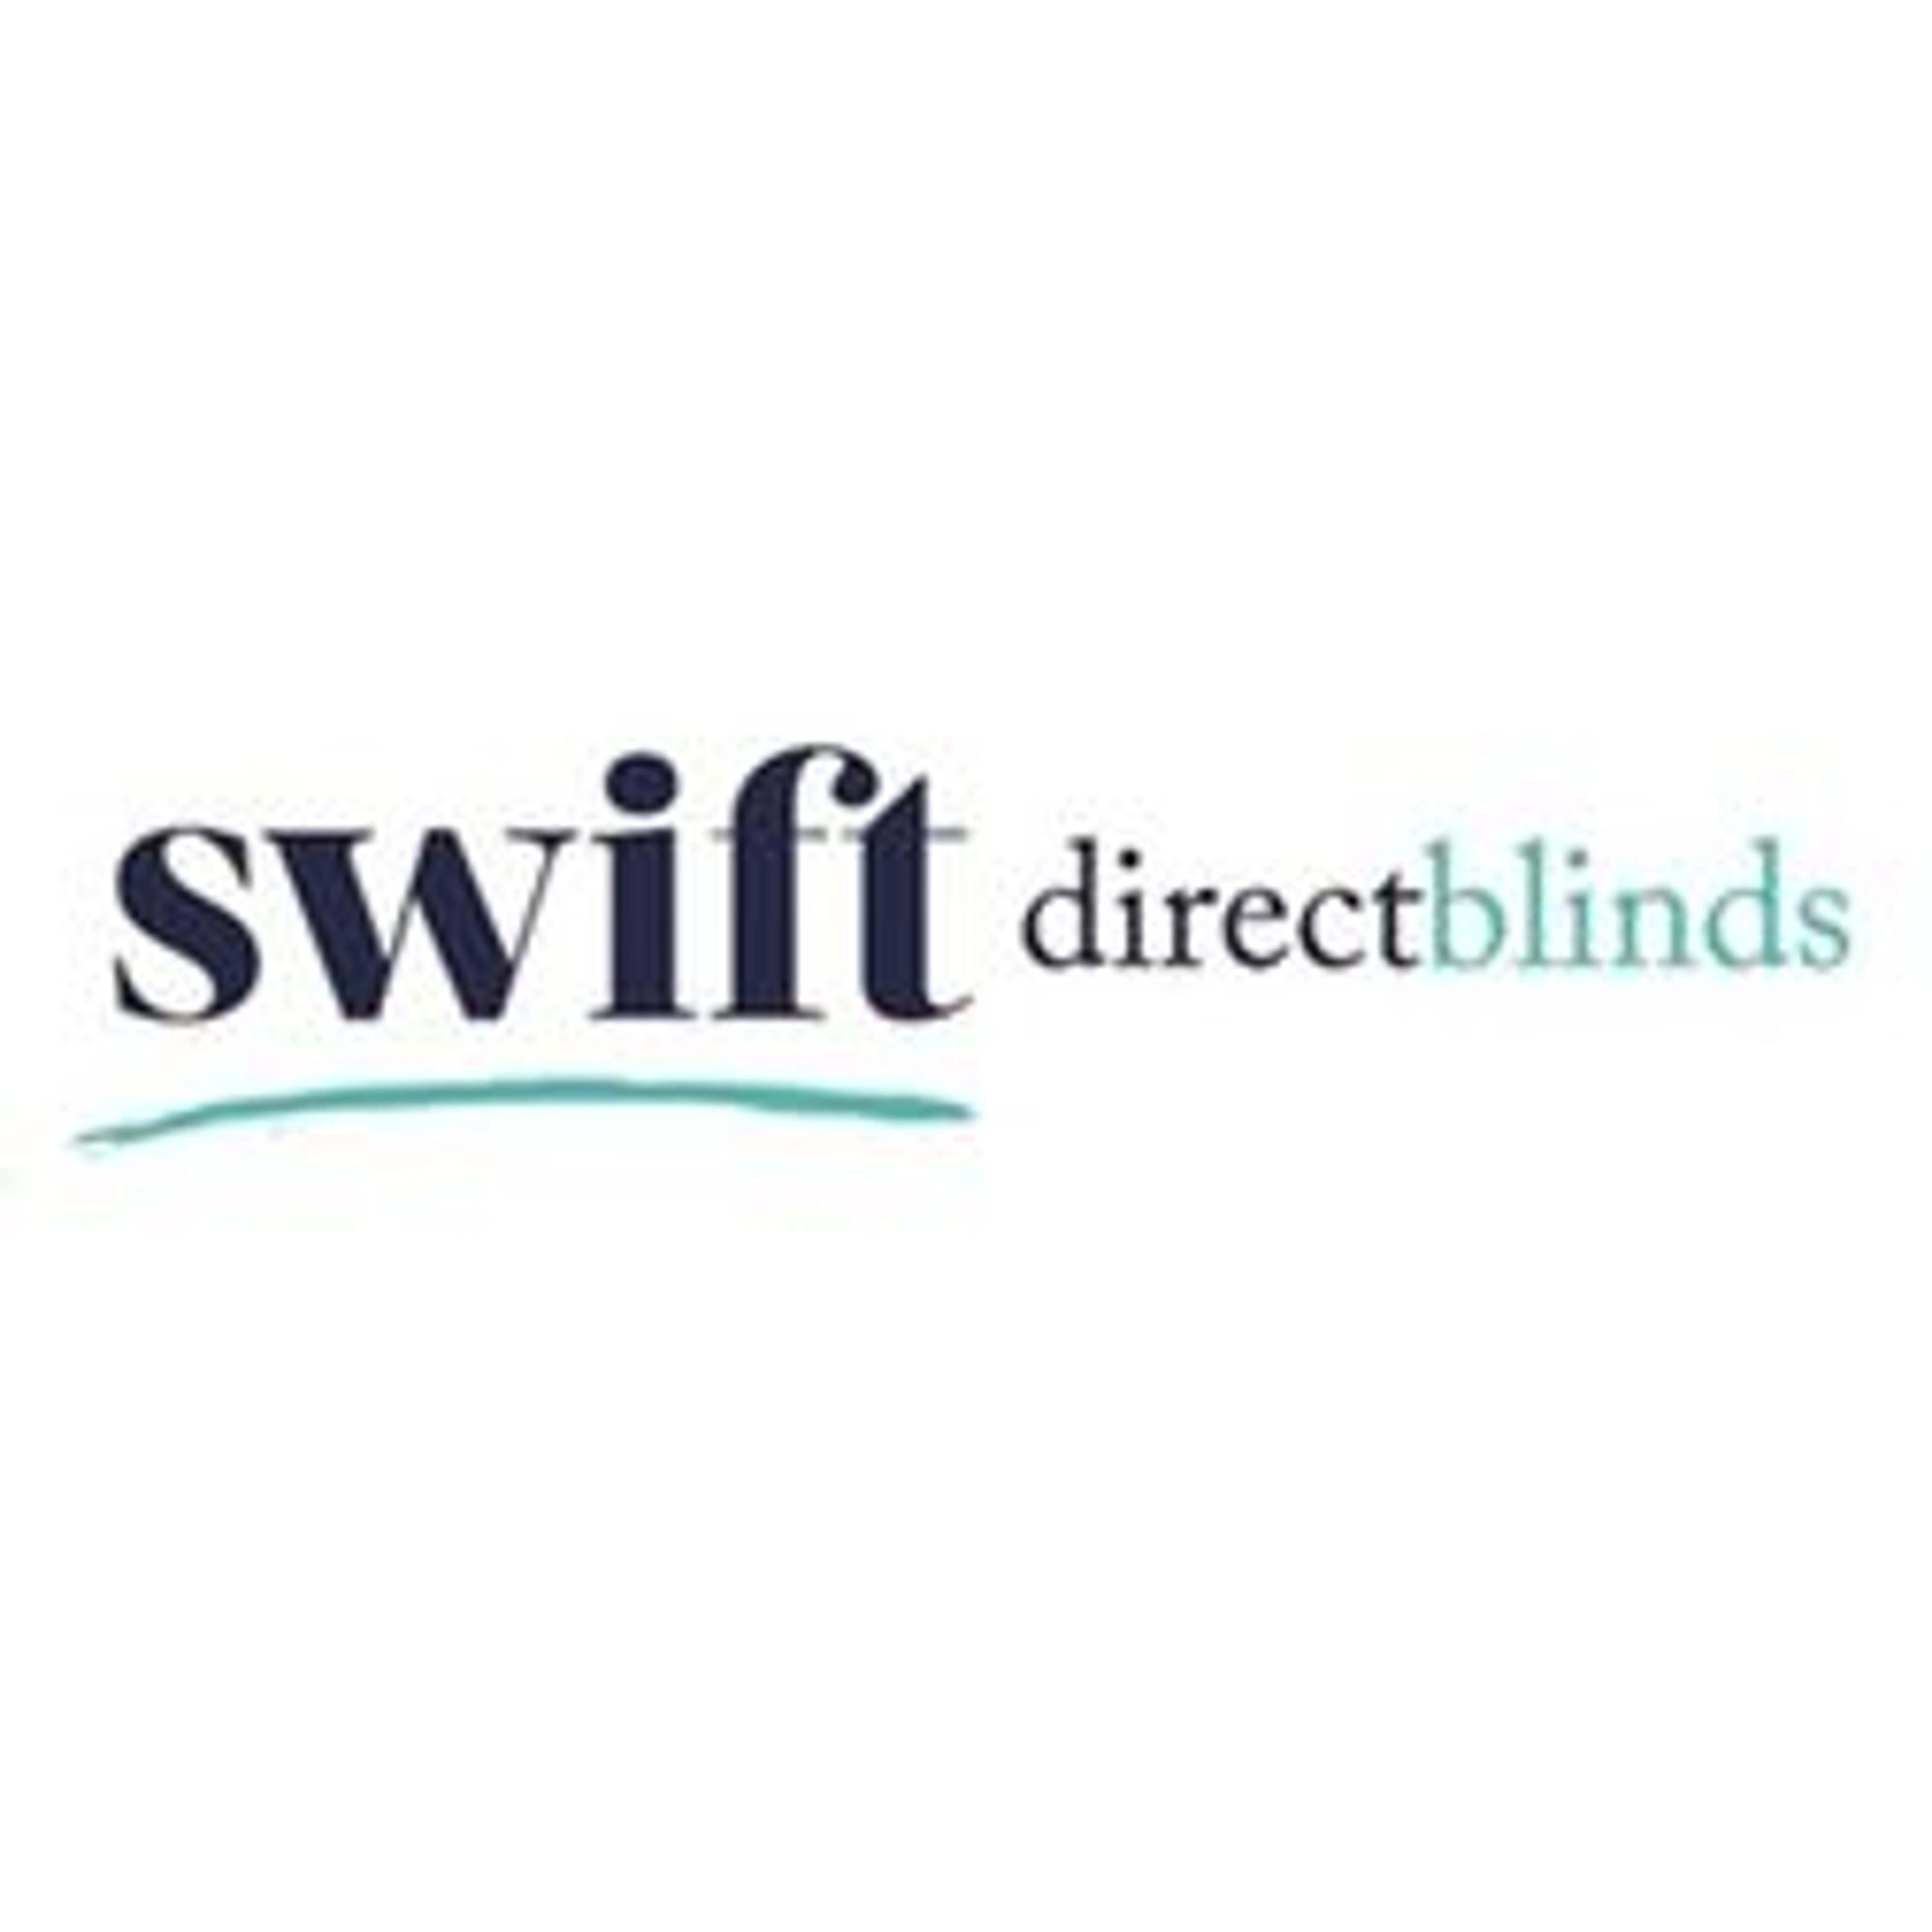  Swift Direct Blinds 